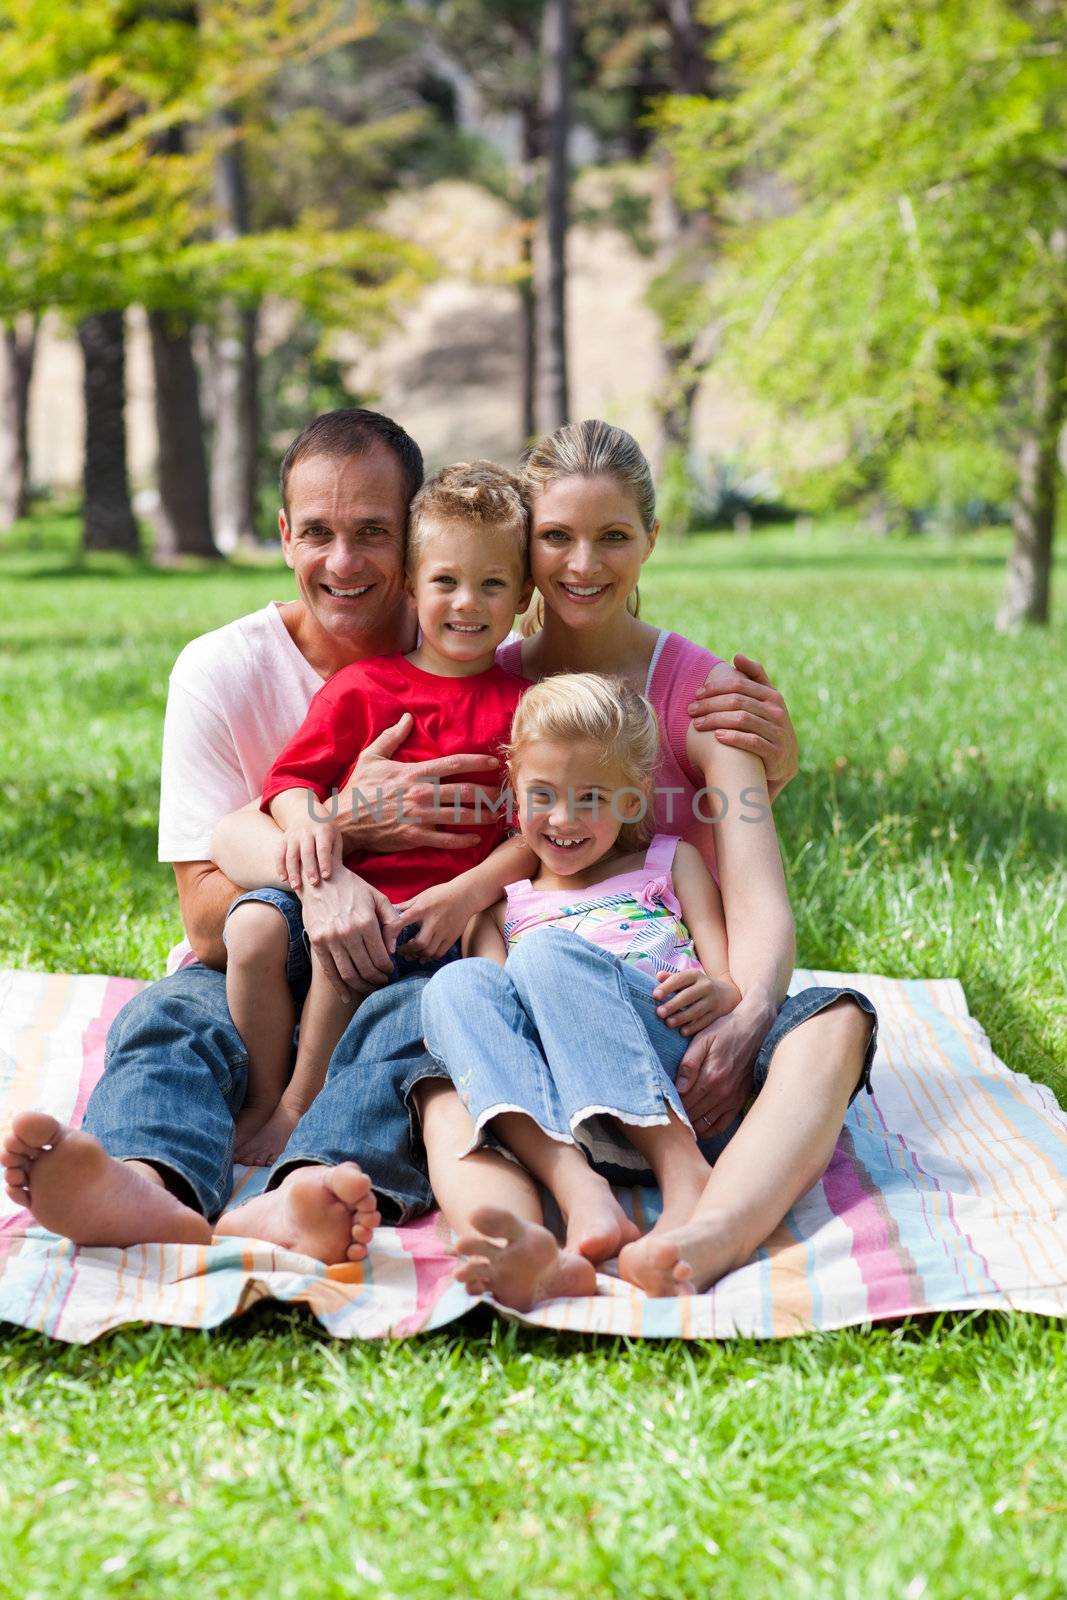 Portrait of a smiling family having a picnic in a park